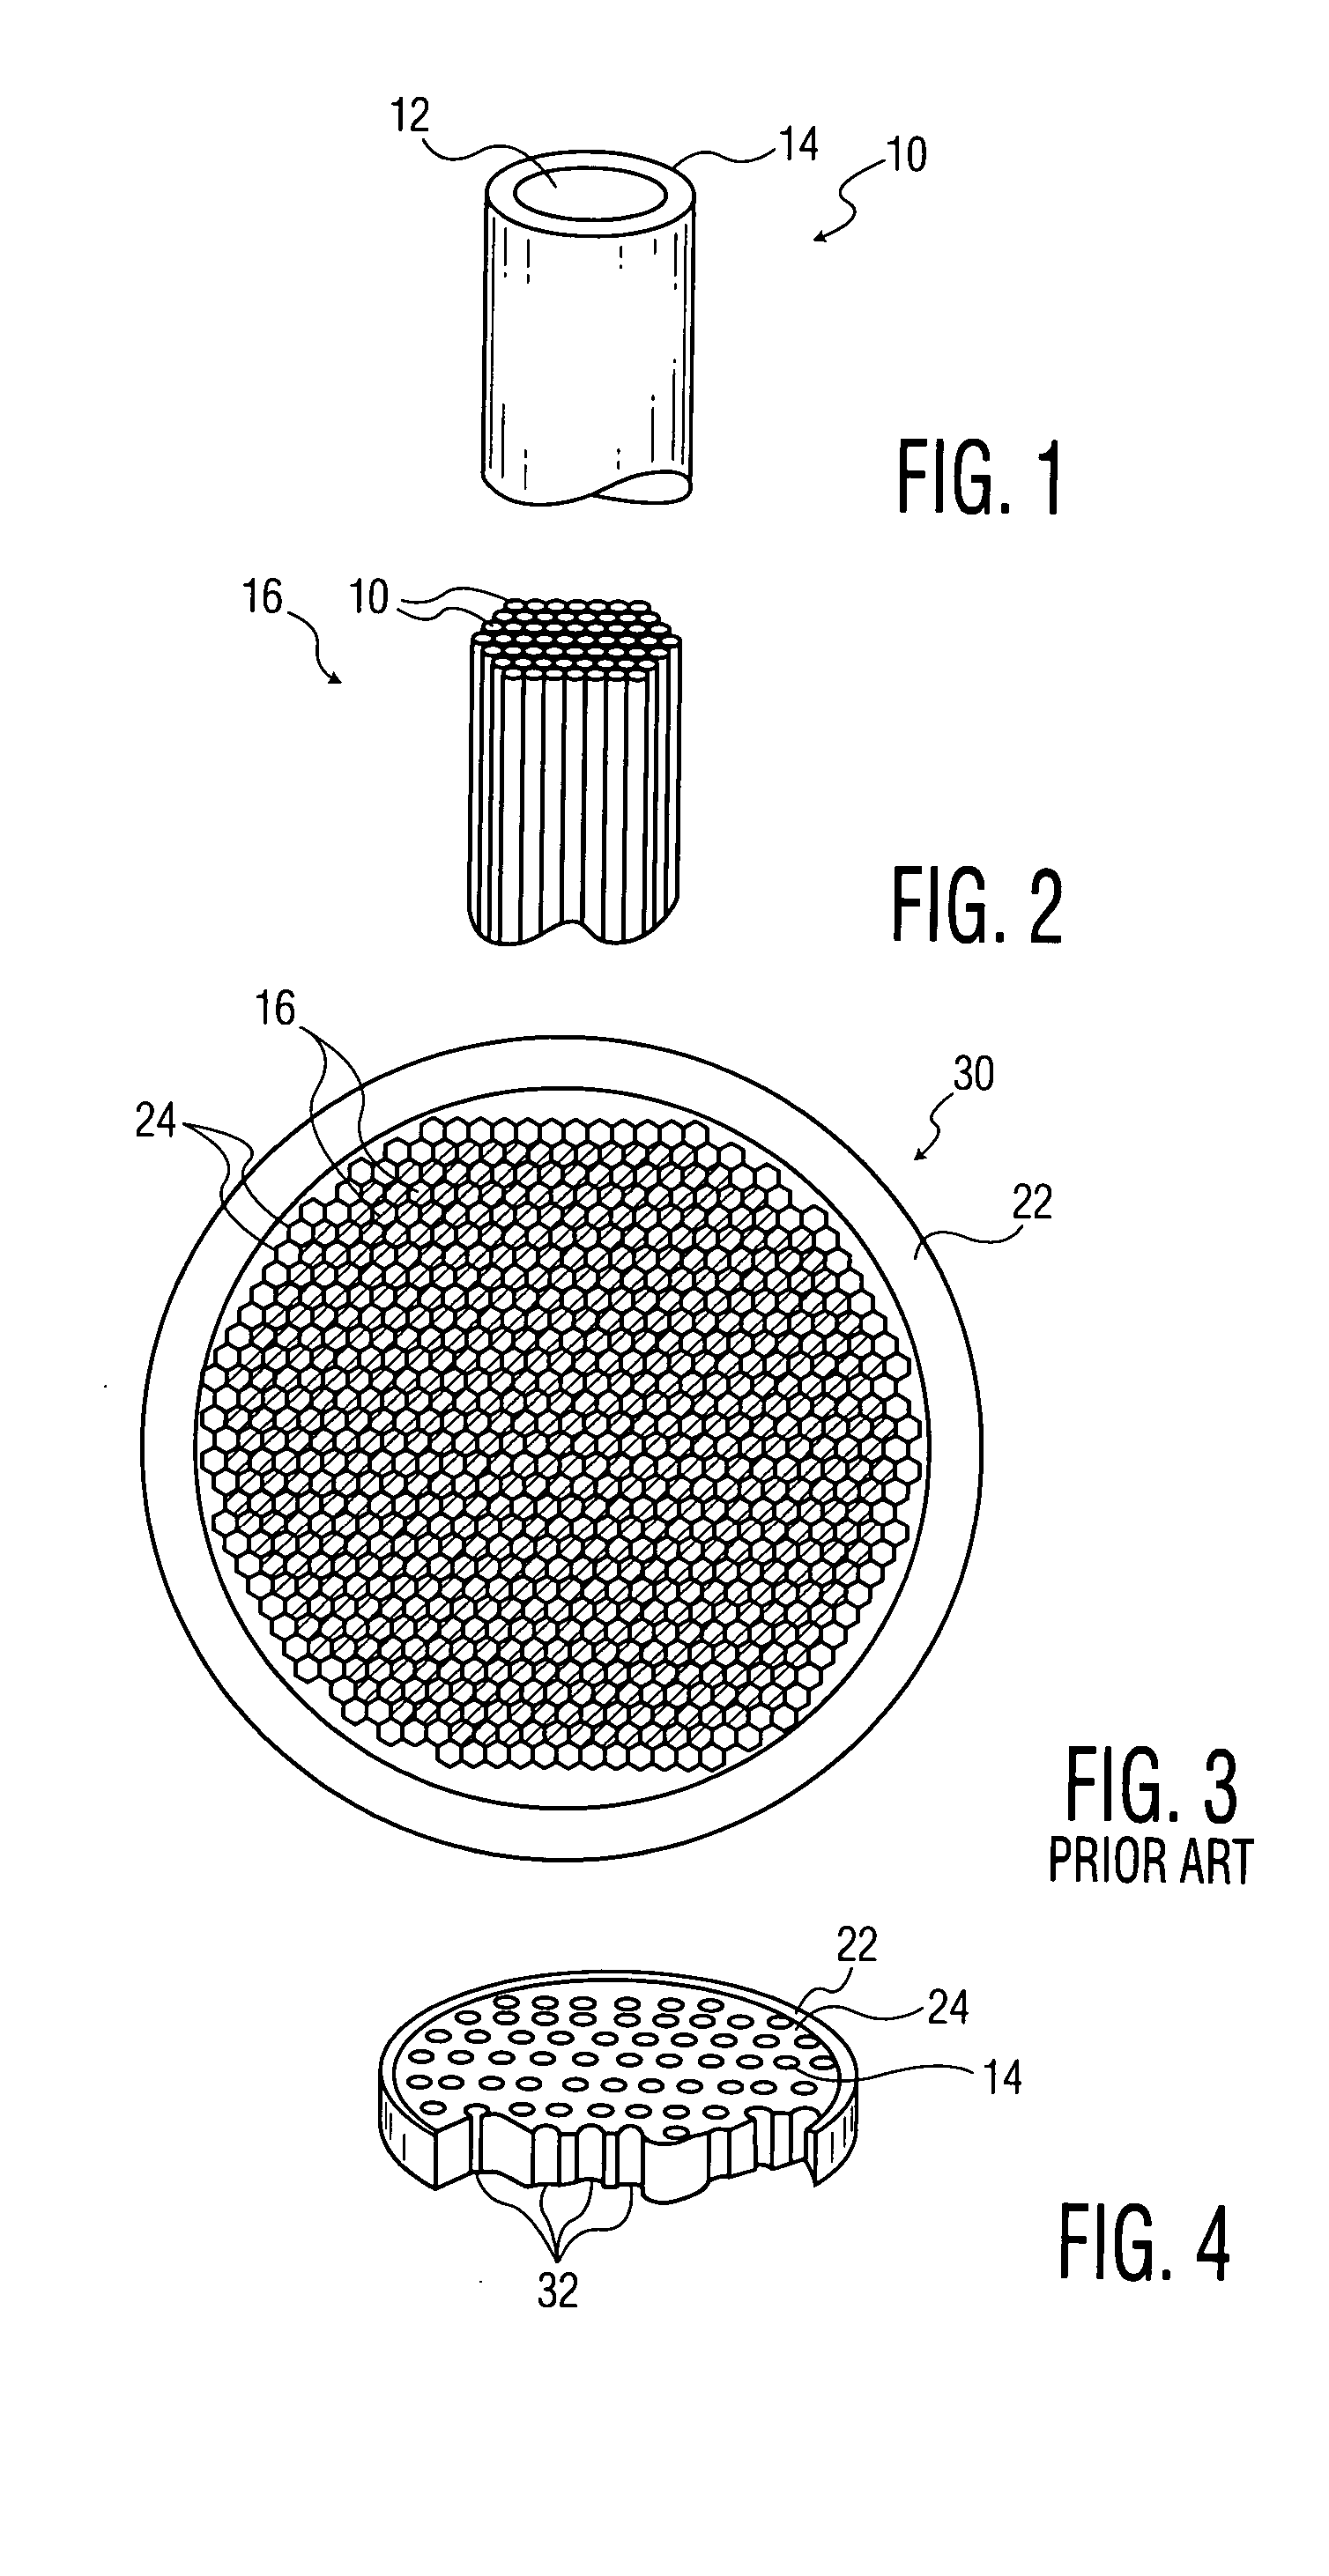 Perforated mega-boule wafer for fabrication of microchannel plates (MCPs)